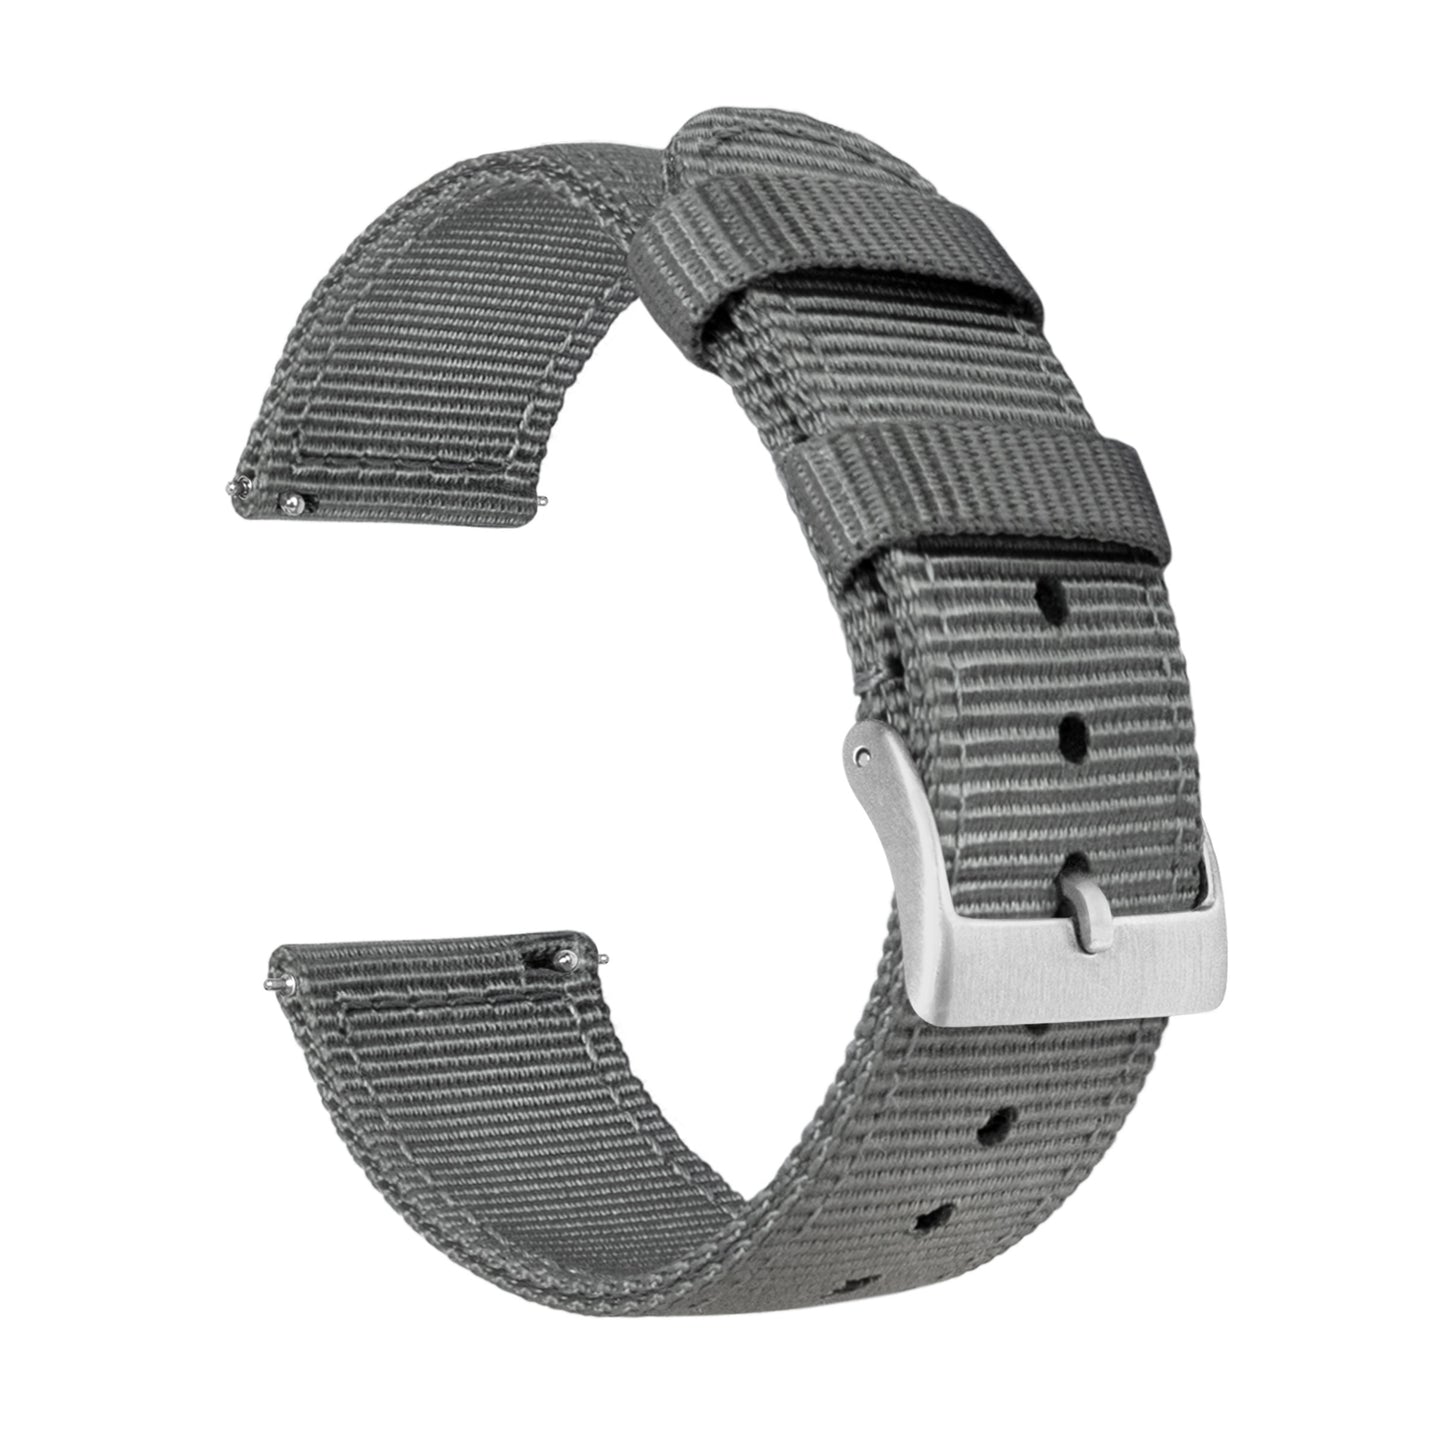 Fossil Q | Two-Piece NATO Style | Smoke Grey - Barton Watch Bands